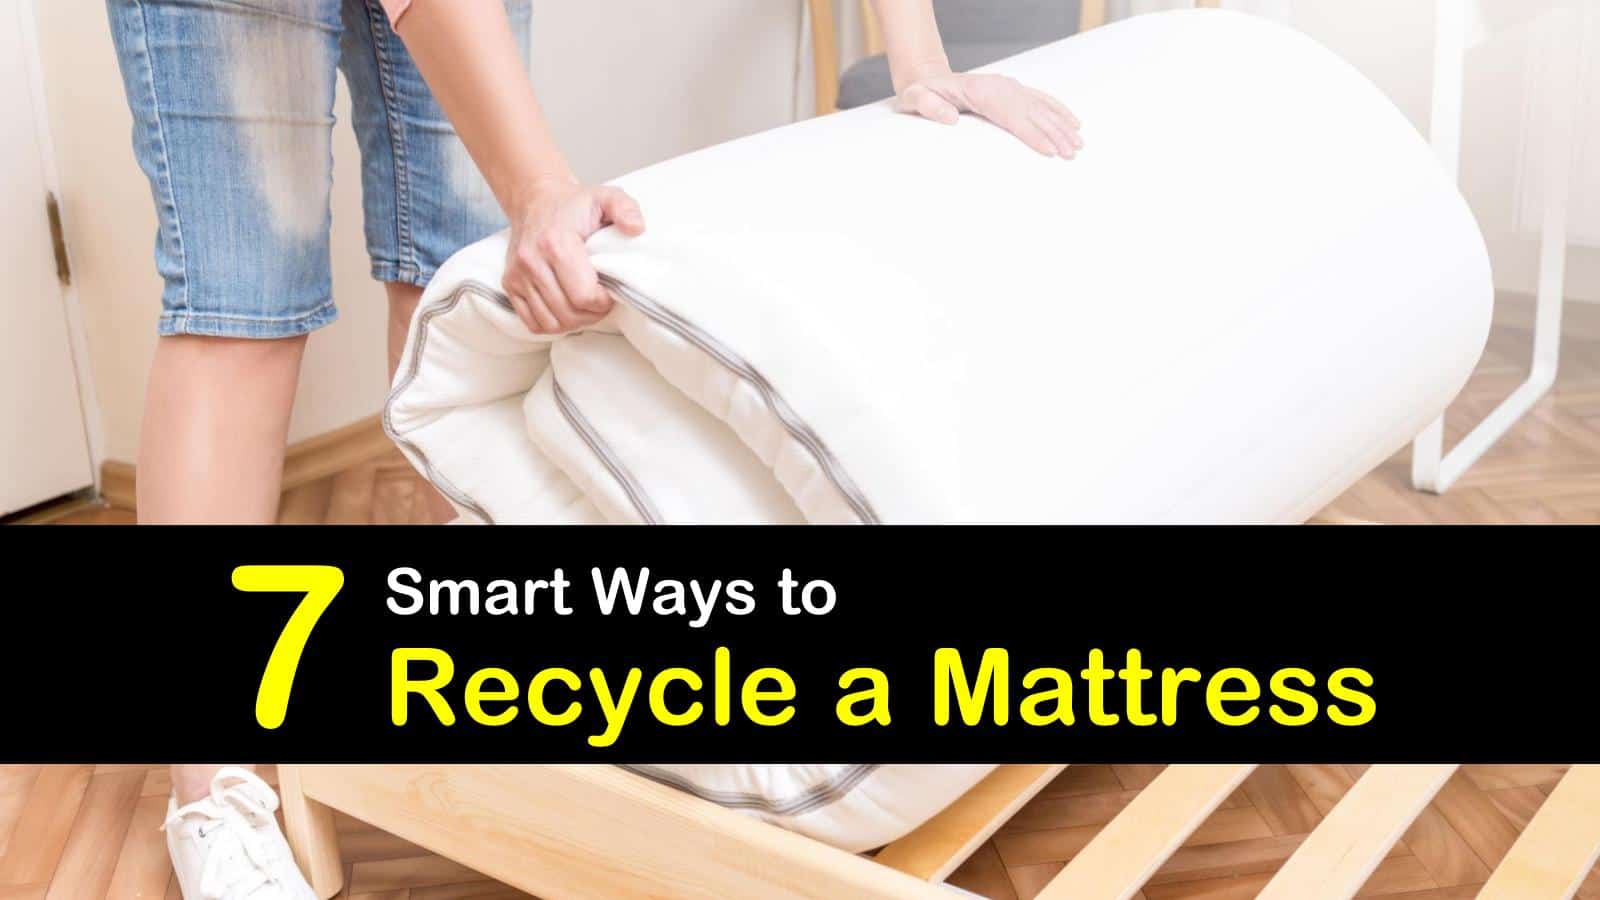 how to recycle a mattress titleimg1